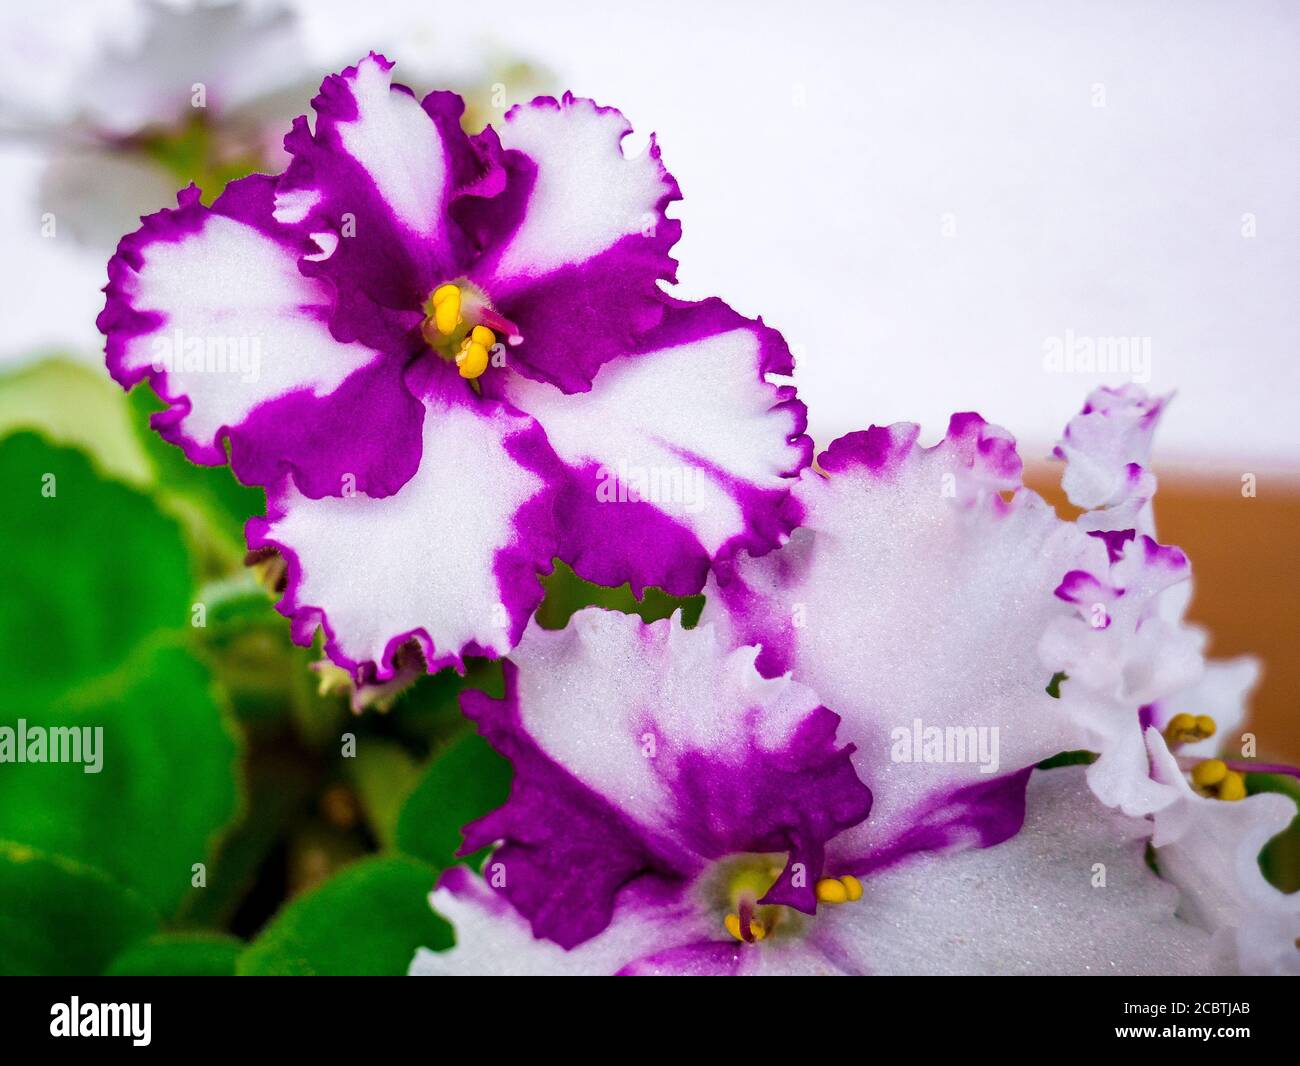 Flowering African violet (Saintpaulia) - close up view at rare patterns on petals. Stock Photo